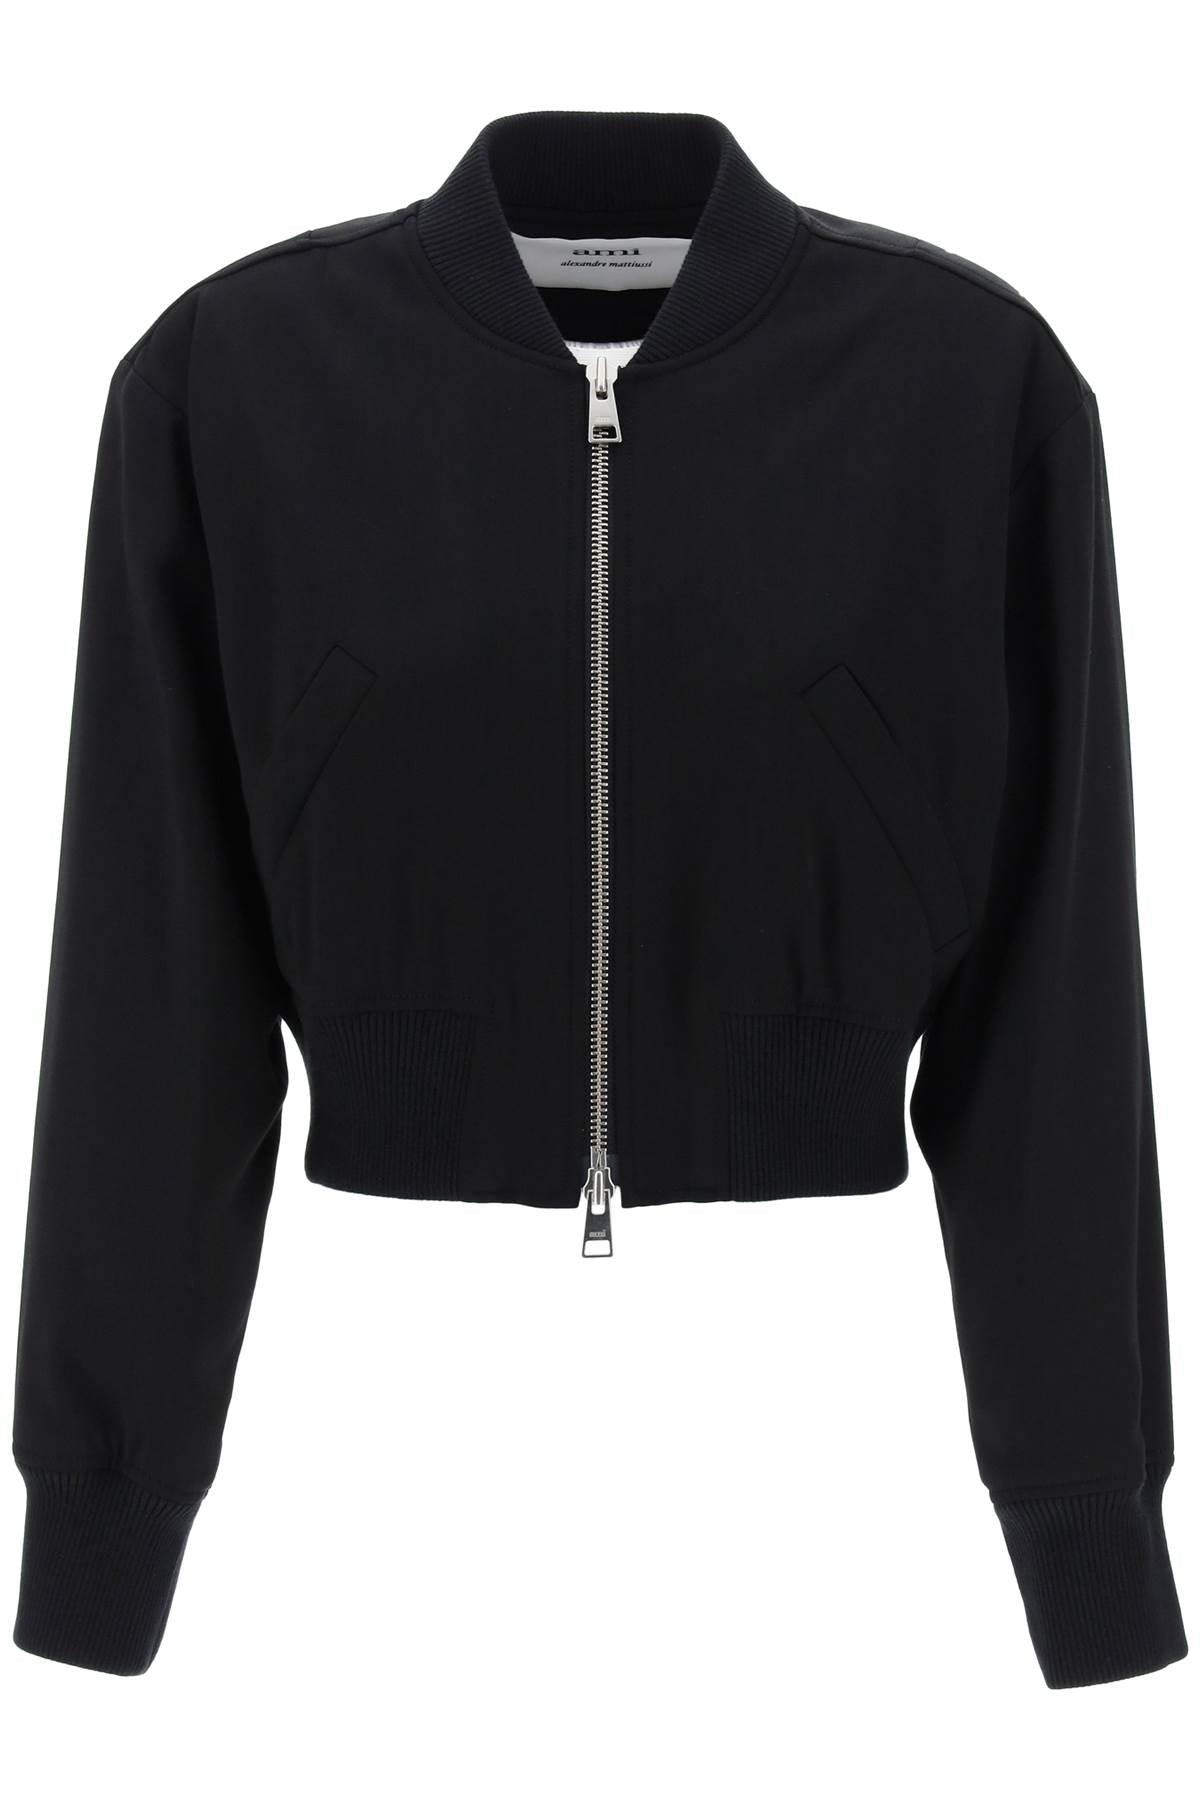 Shop Ami Alexandre Mattiussi Cropped Twill Bomber Jacket For Women In Black